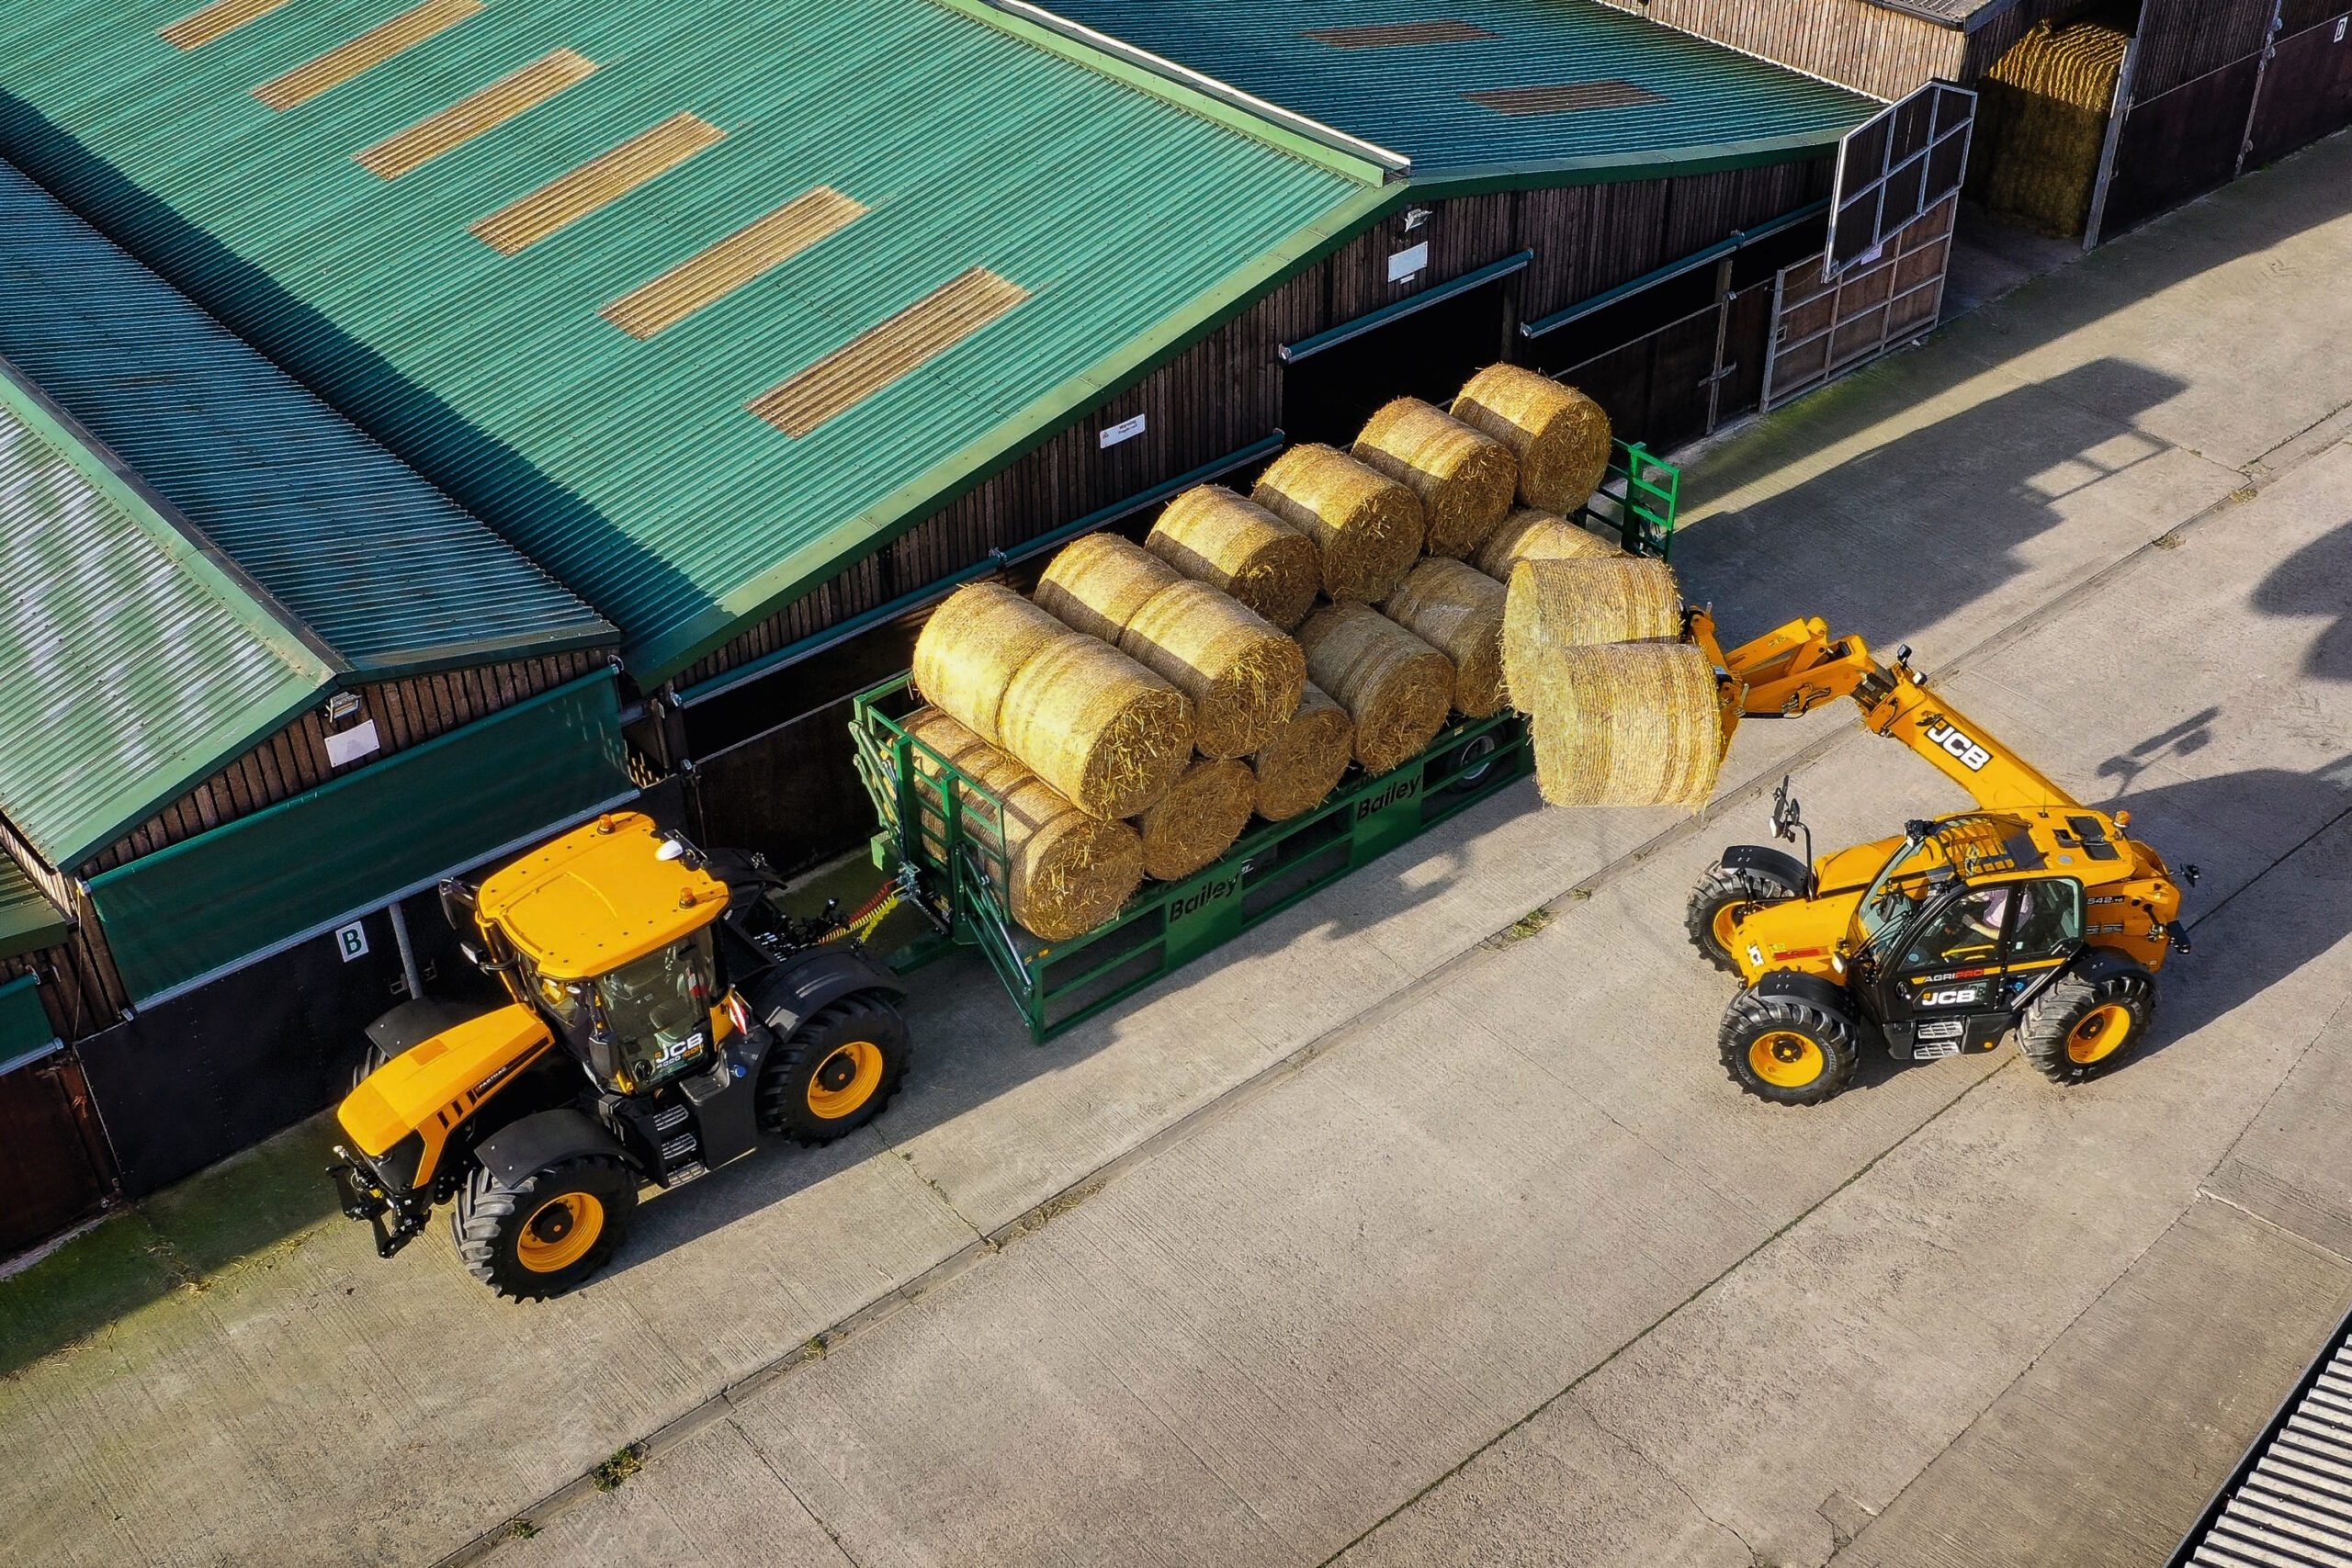 Chandlers invests in JCB franchise with Cotswolds expansion